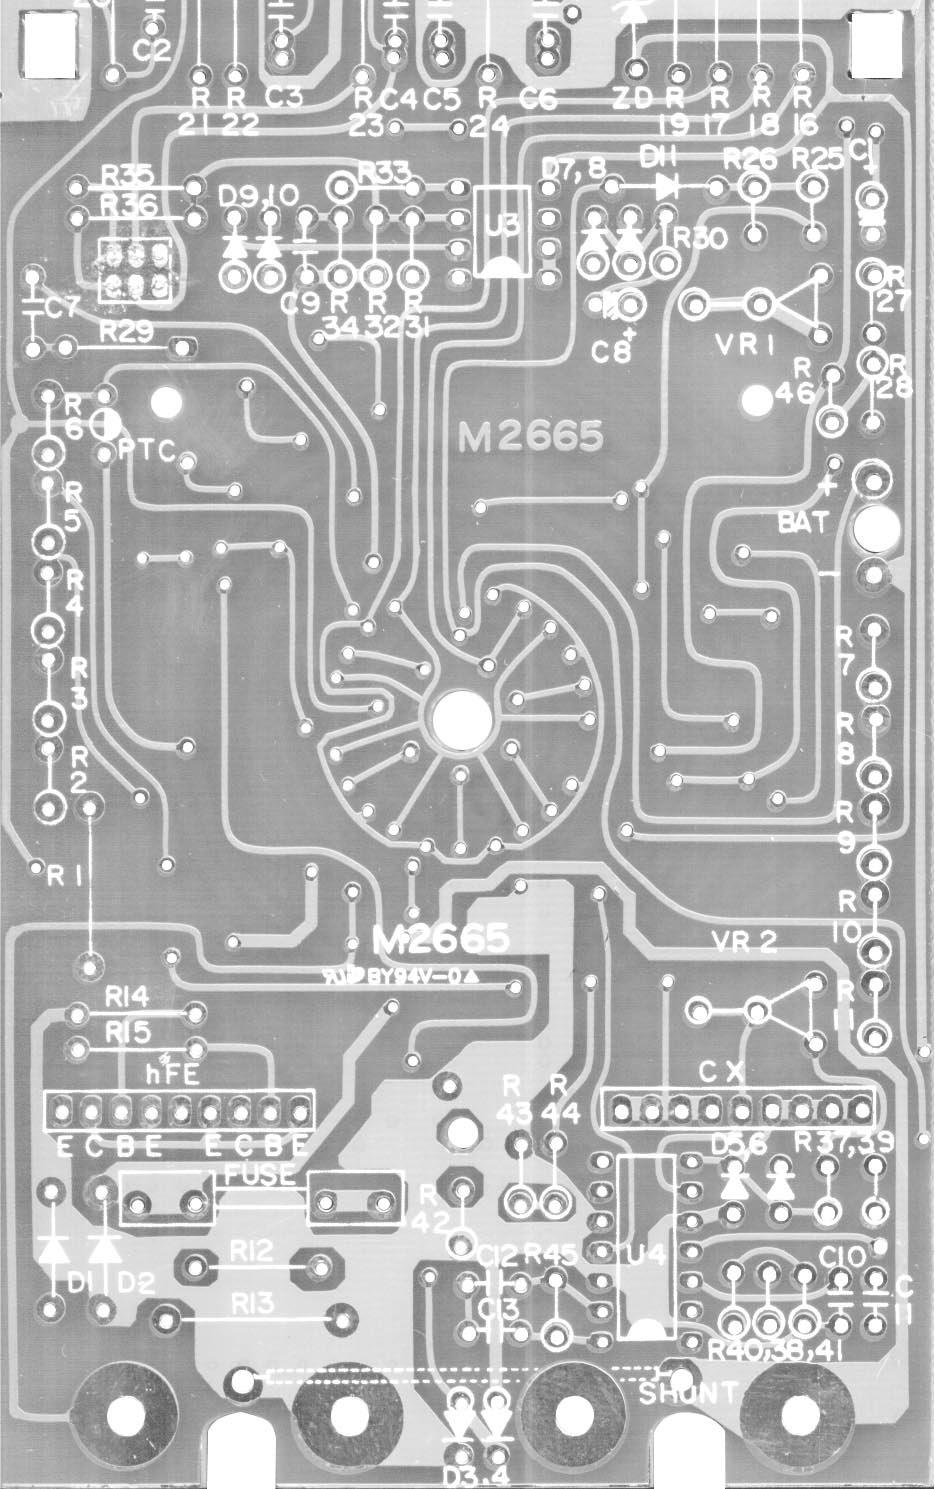 FINAL ASSEMBLY Solder the spring to the PC board as shown in Figure Ja. See Figure K for the following steps.